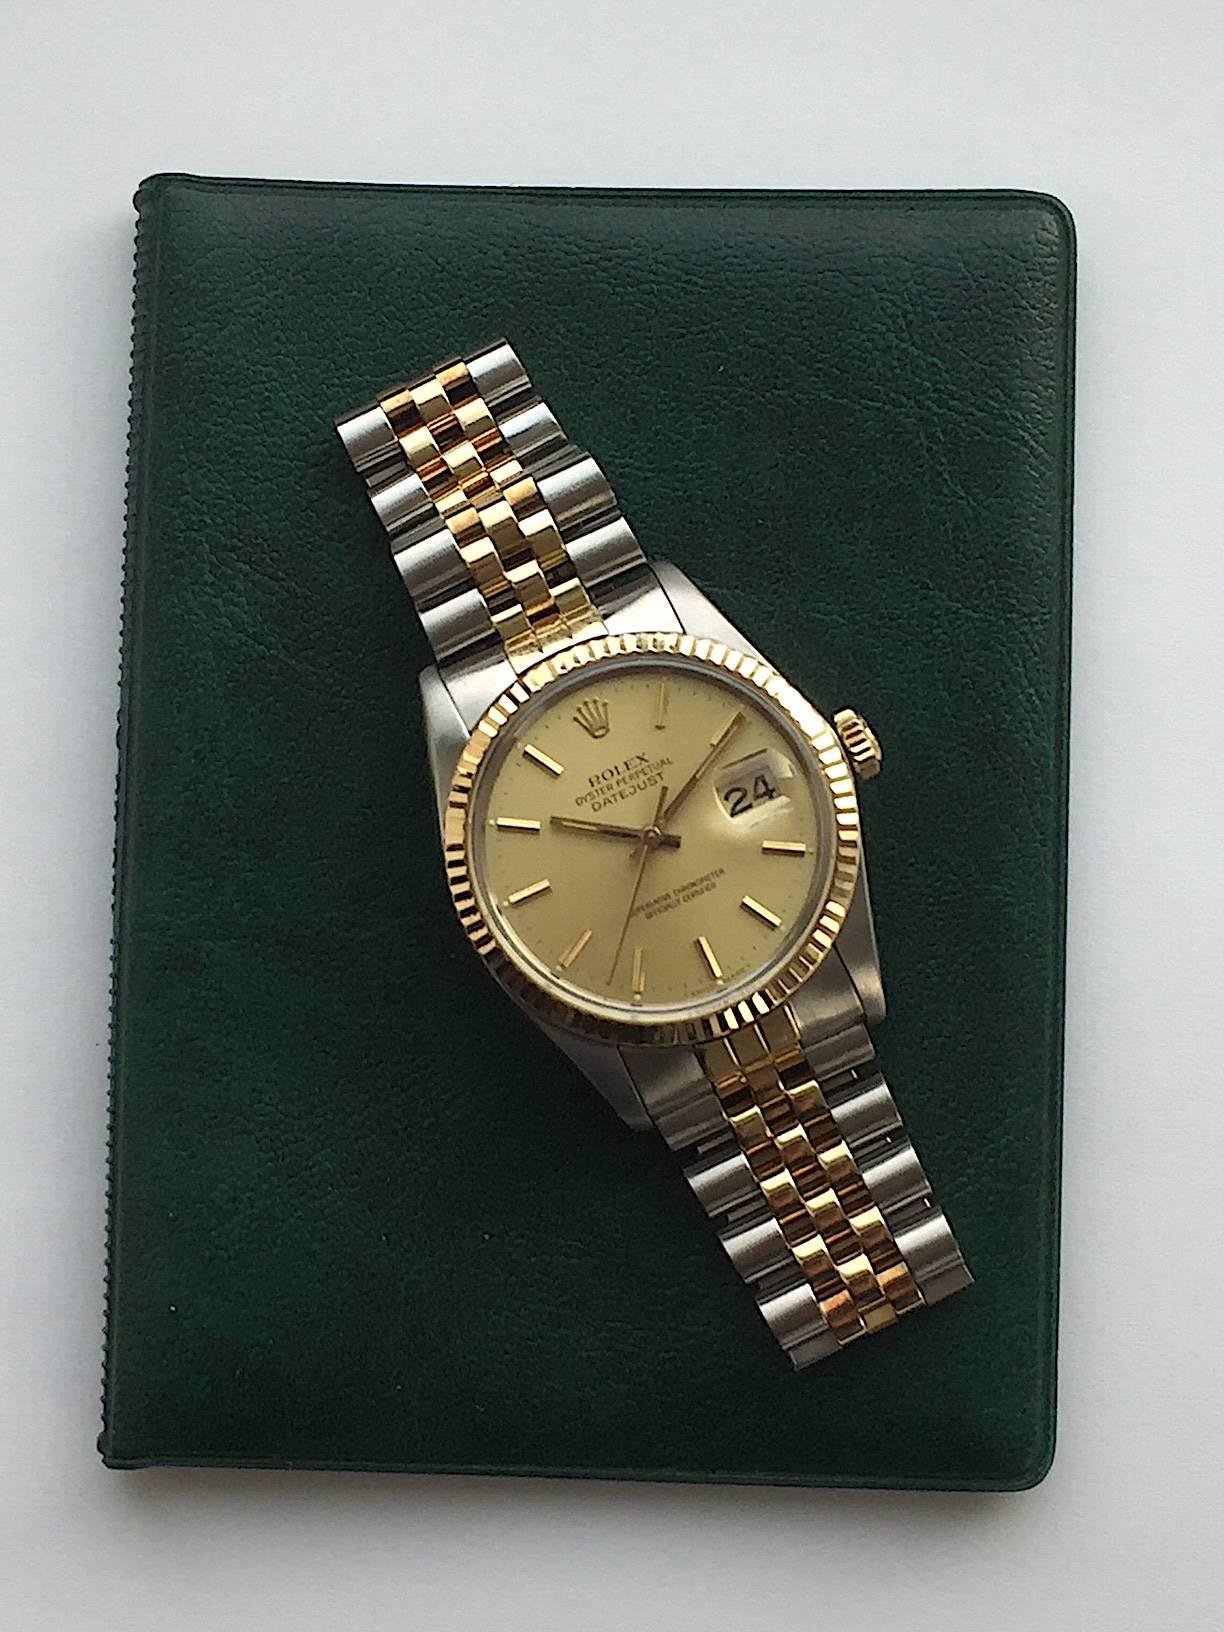 Rolex Stainless Steel and Yellow Gold Oyster Perpetual Datejust Watch
Factory Champagne Dial with Applied Hour Markers
Yellow Gold Fluted Bezel
36mm in size 
Rolex Calibre Base 3035 Automatic Movement with Quick-Set Date Function
Acrylic